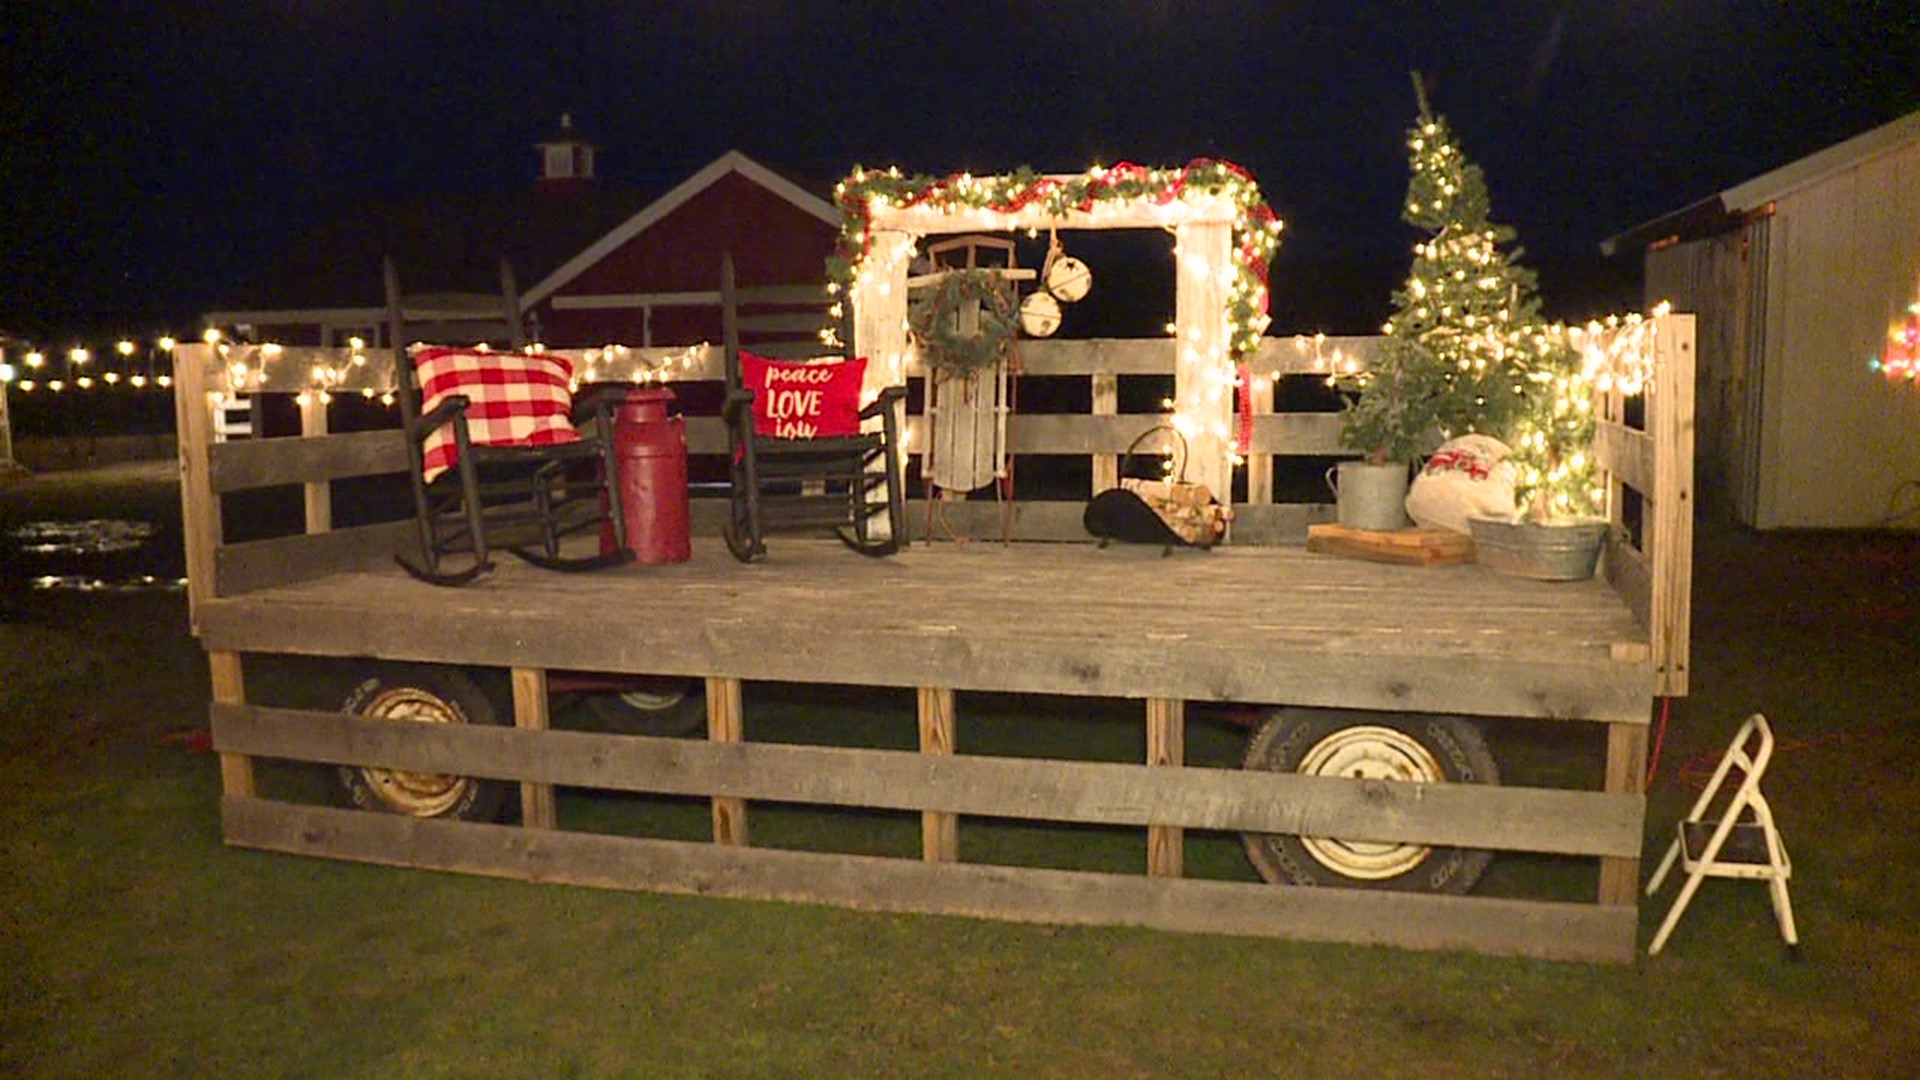 For one family in Wayne County, putting up their own Christmas tree wasn't enough. Instead, they transformed their backyard into a Christmas tree farm.